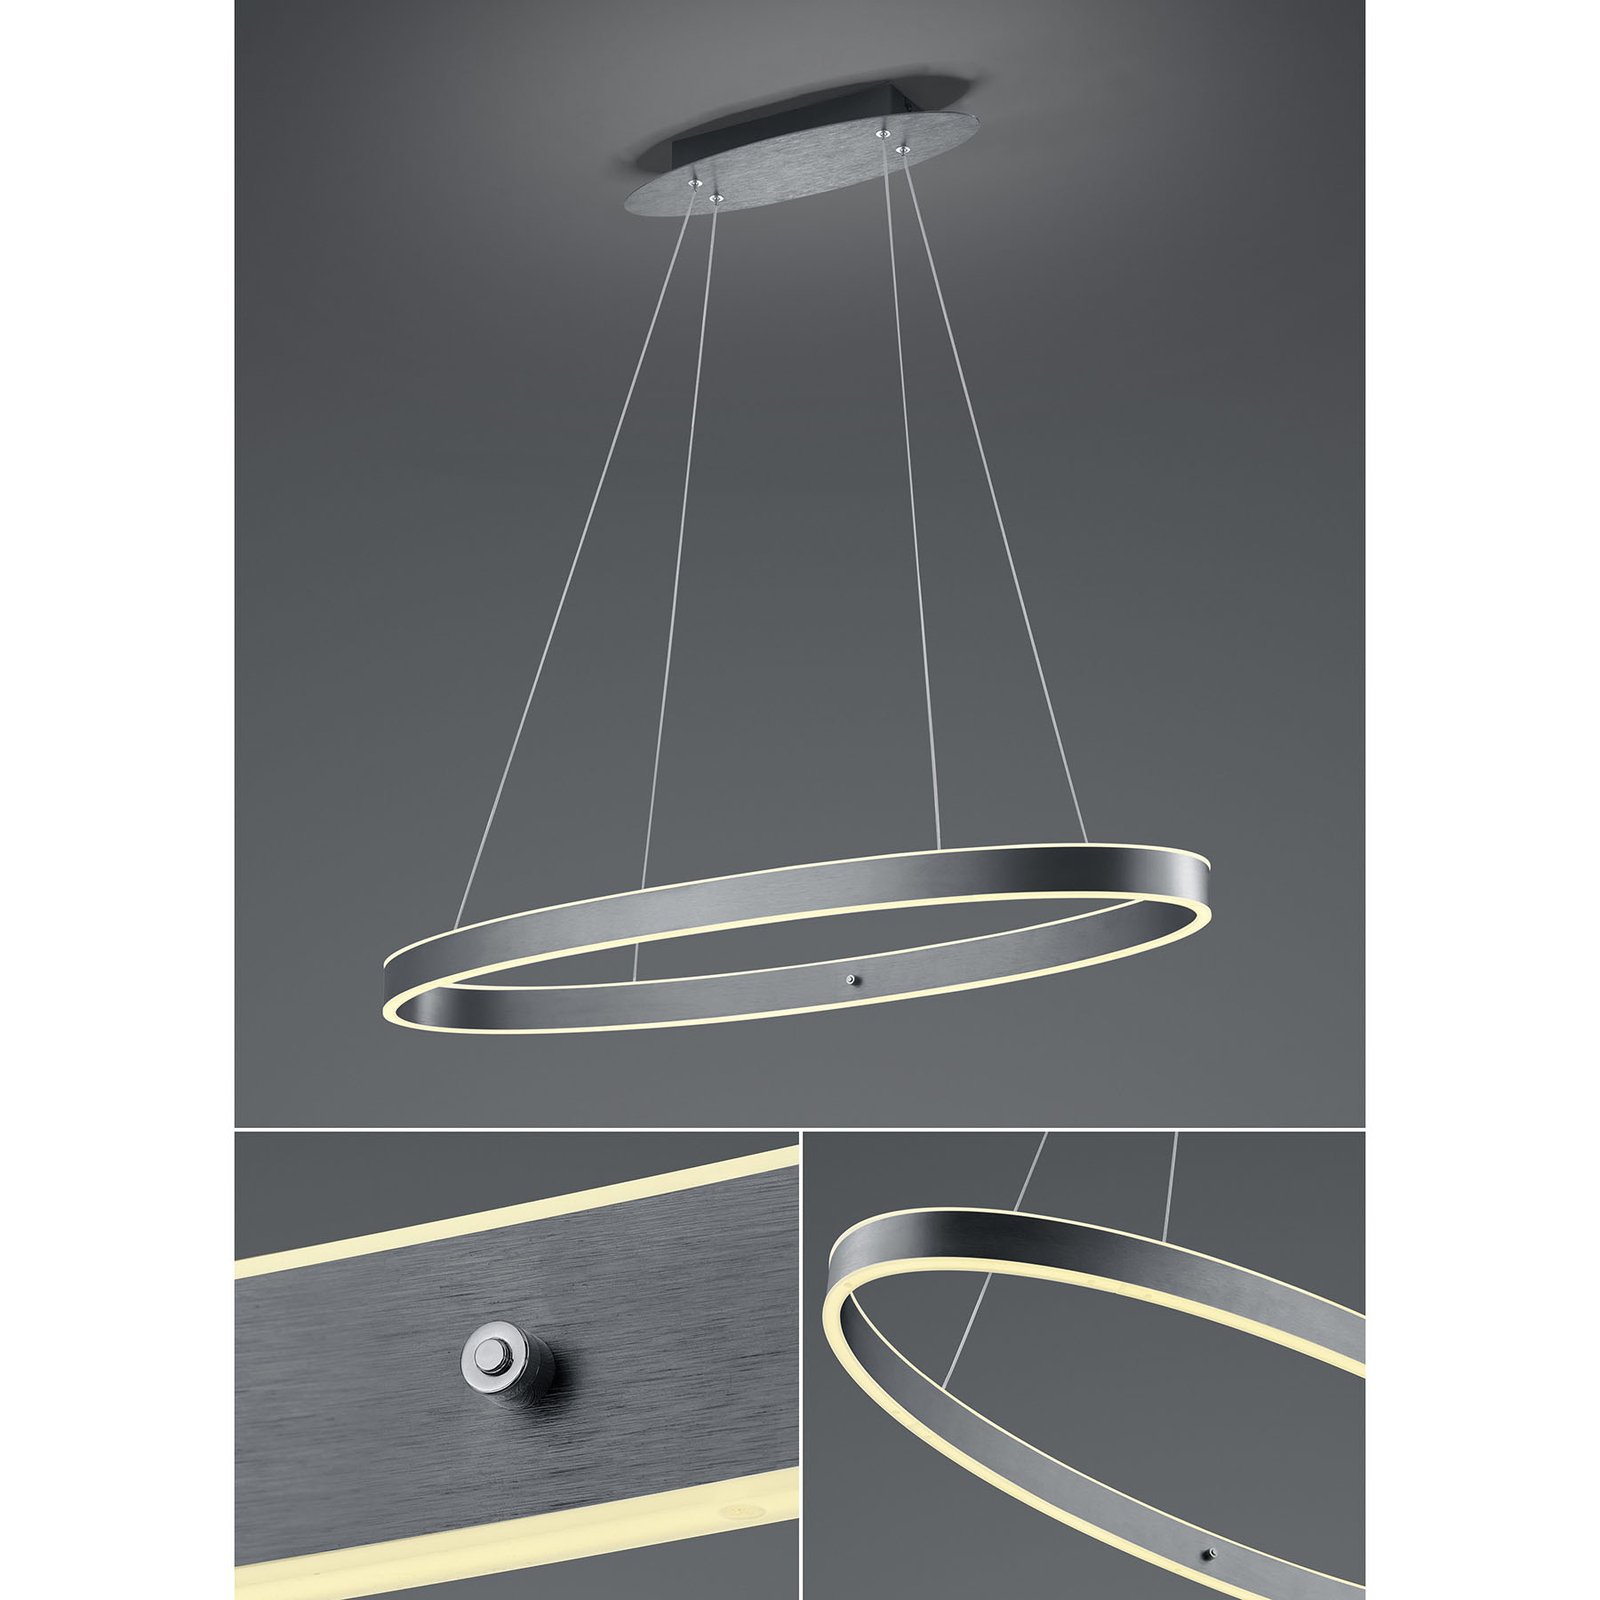 LED hanglamp Delta, rond, antraciet